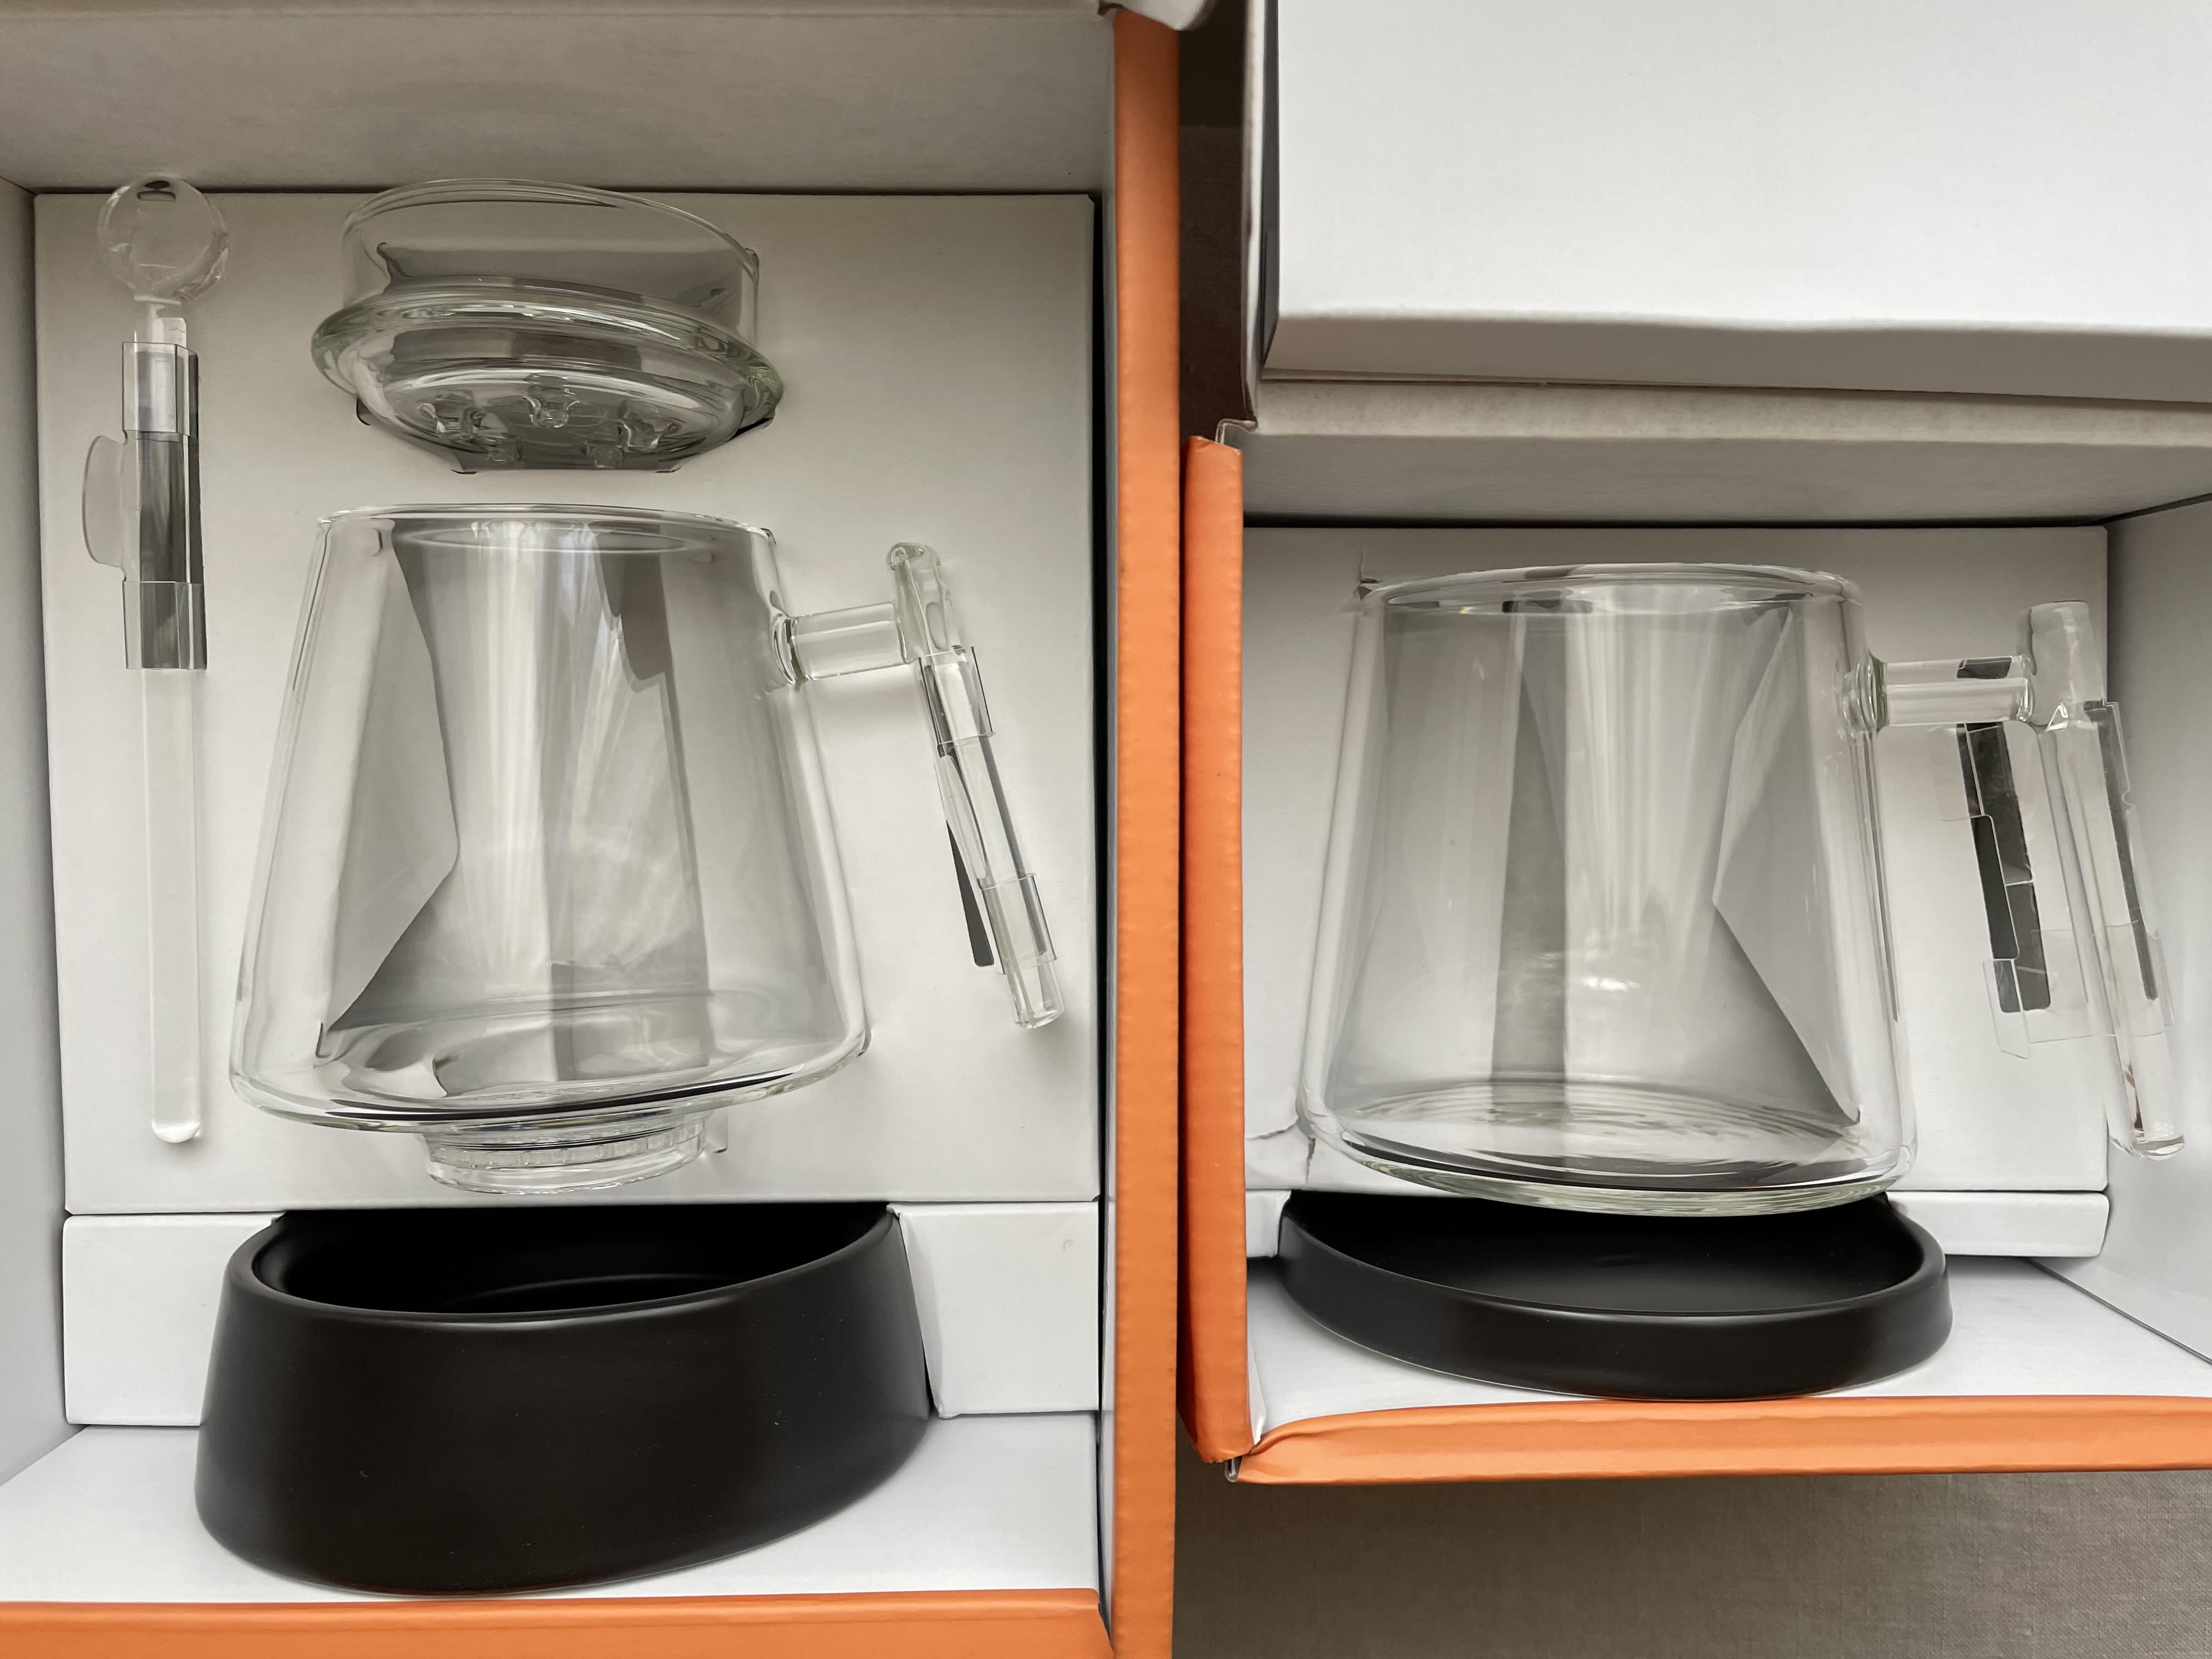 The Stunning 'Pure Over' Coffee Maker Lets You Ditch Paper Filters